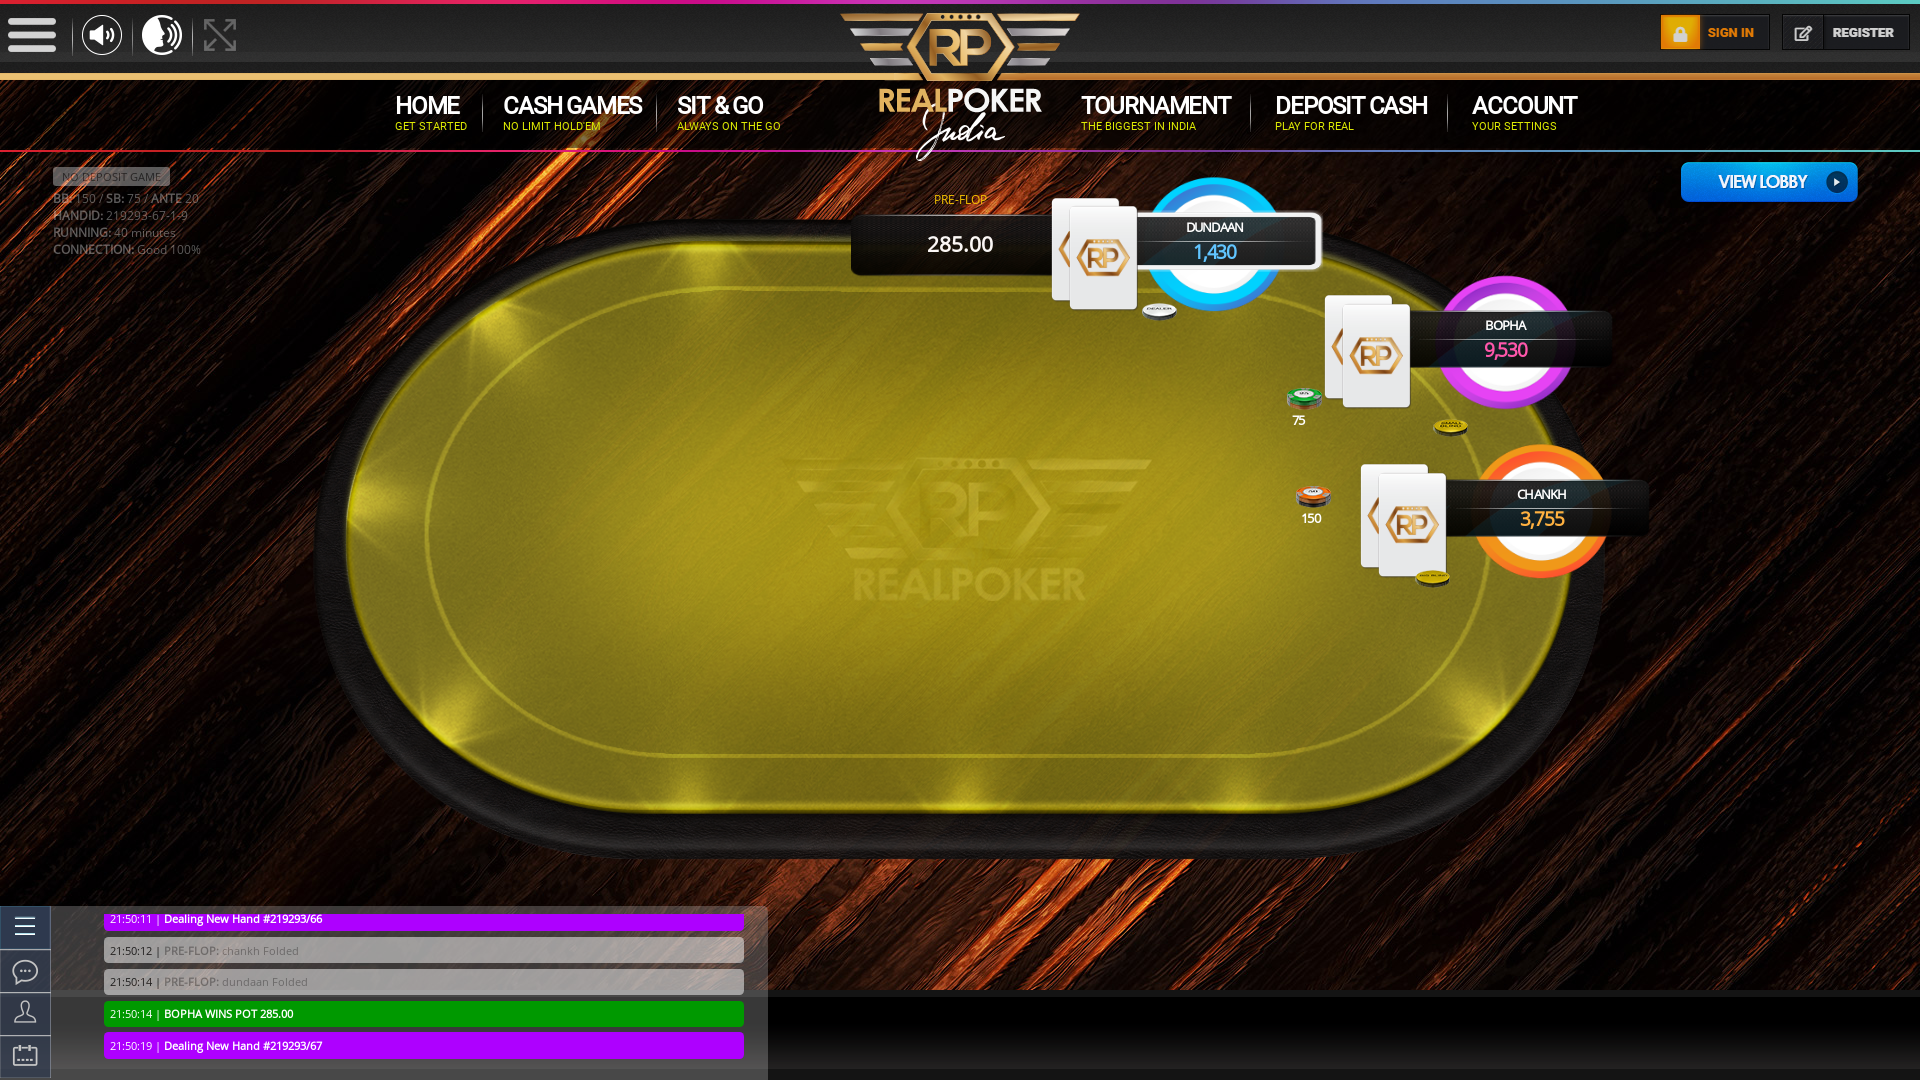 BTM Layout, Bangalore 10 player poker in the 40th minute